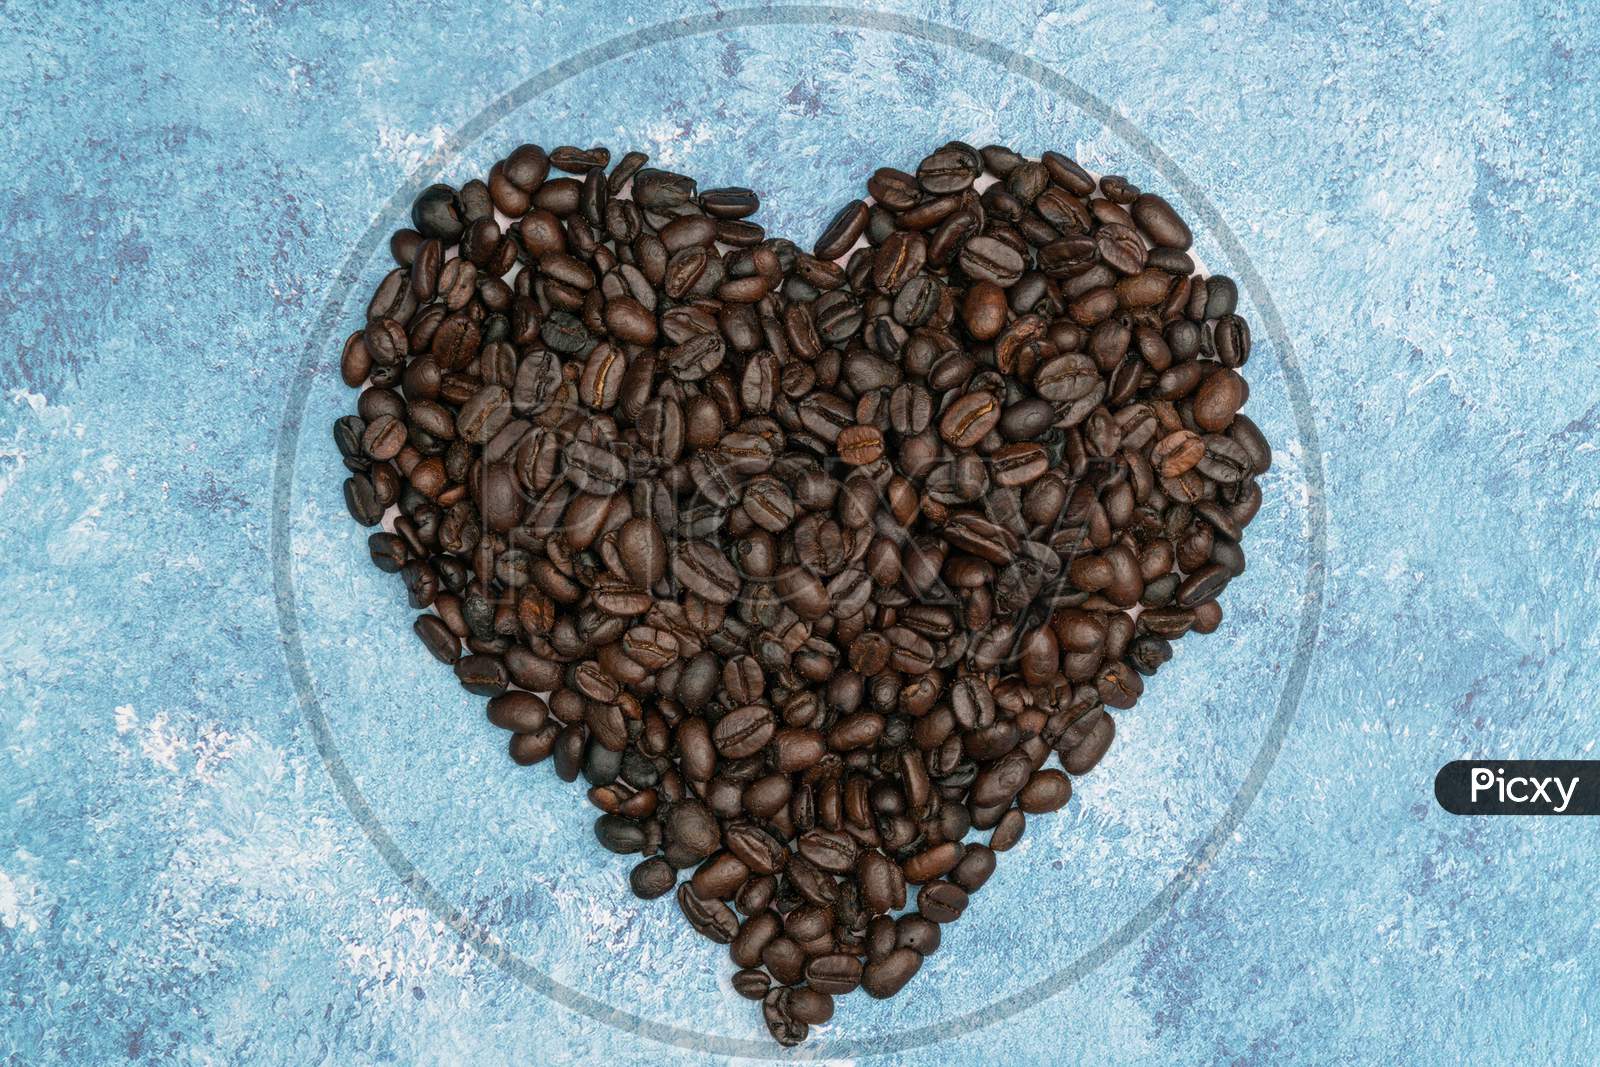 Roasted Coffee Beans, I Love Coffee, Heart With Roasted Coffee Beans.